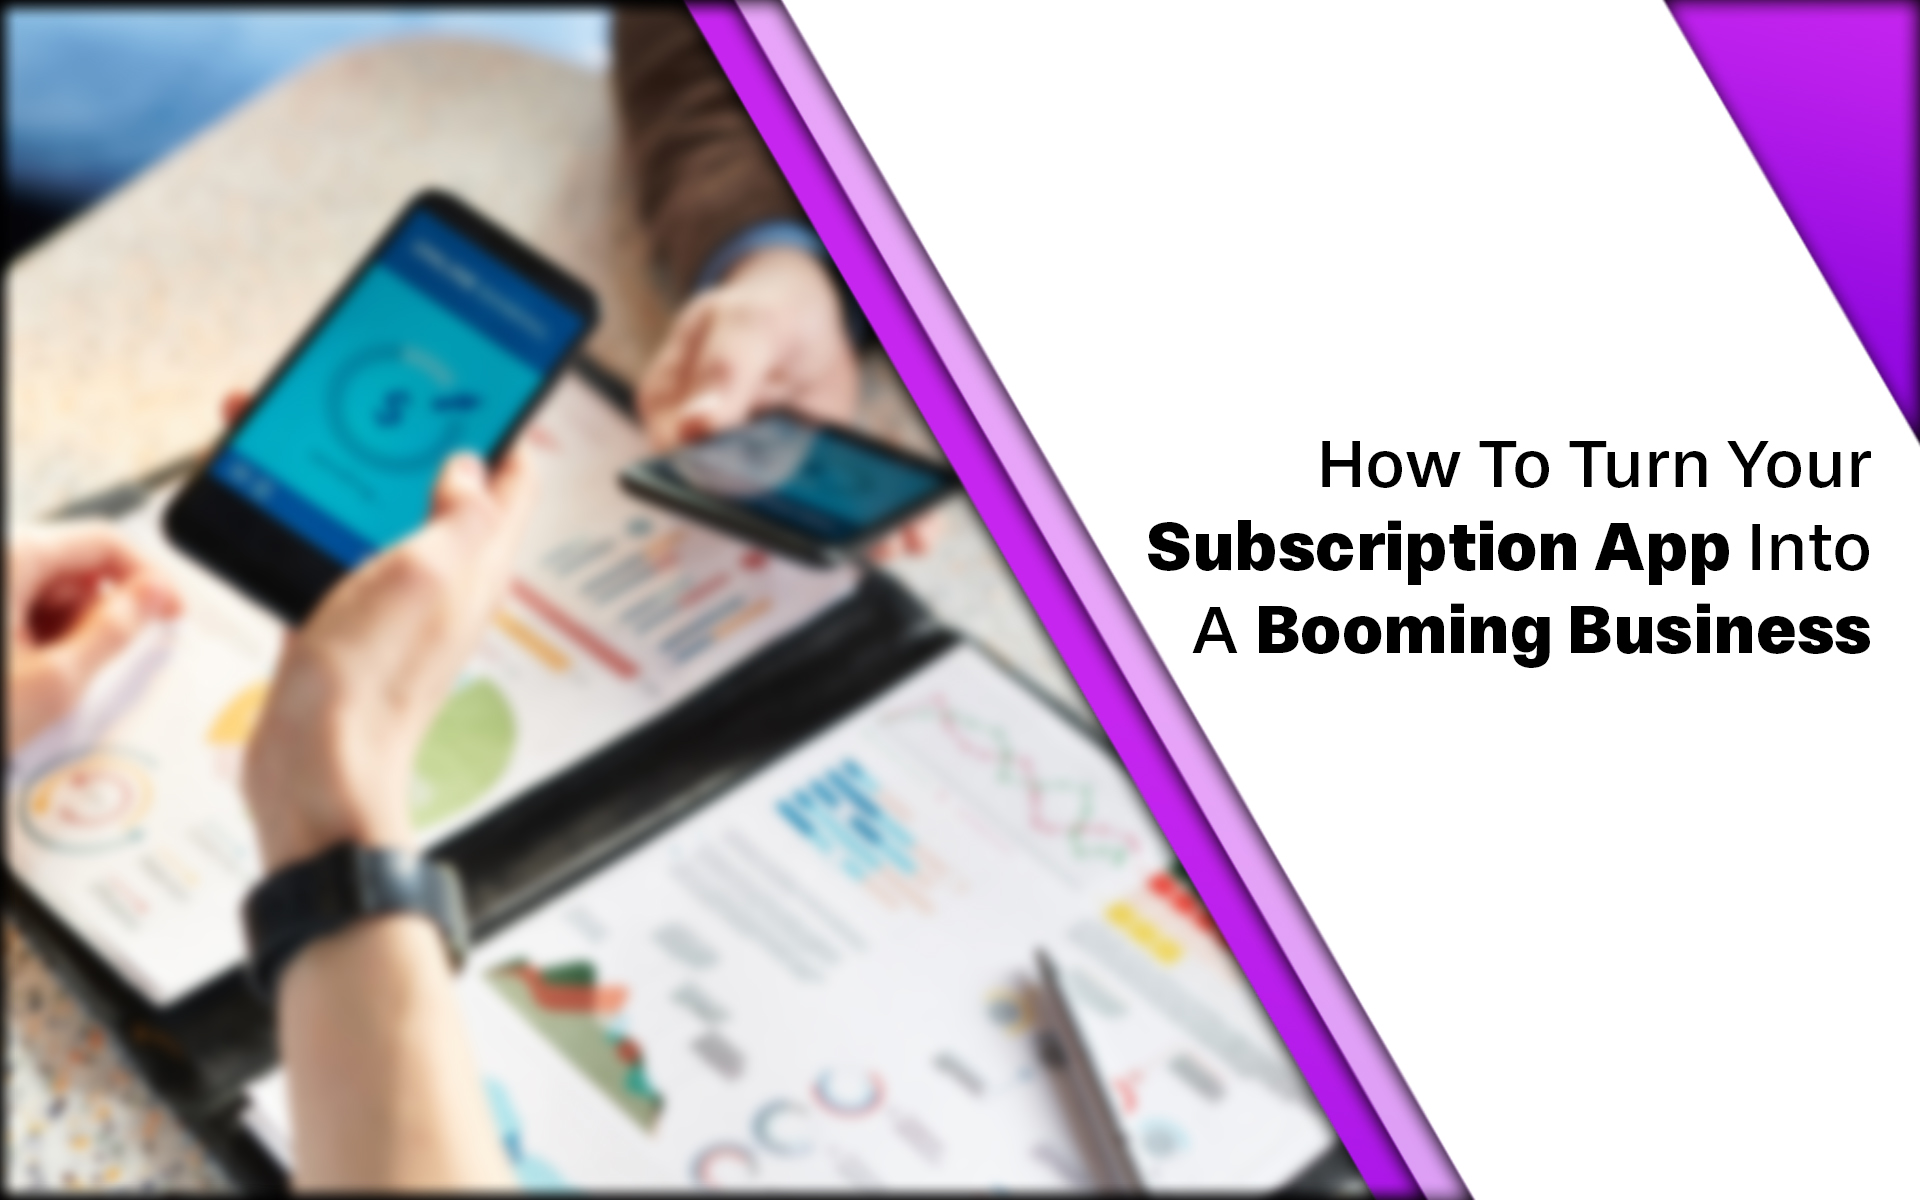 How To Turn Your Subscription App Into A Booming Business